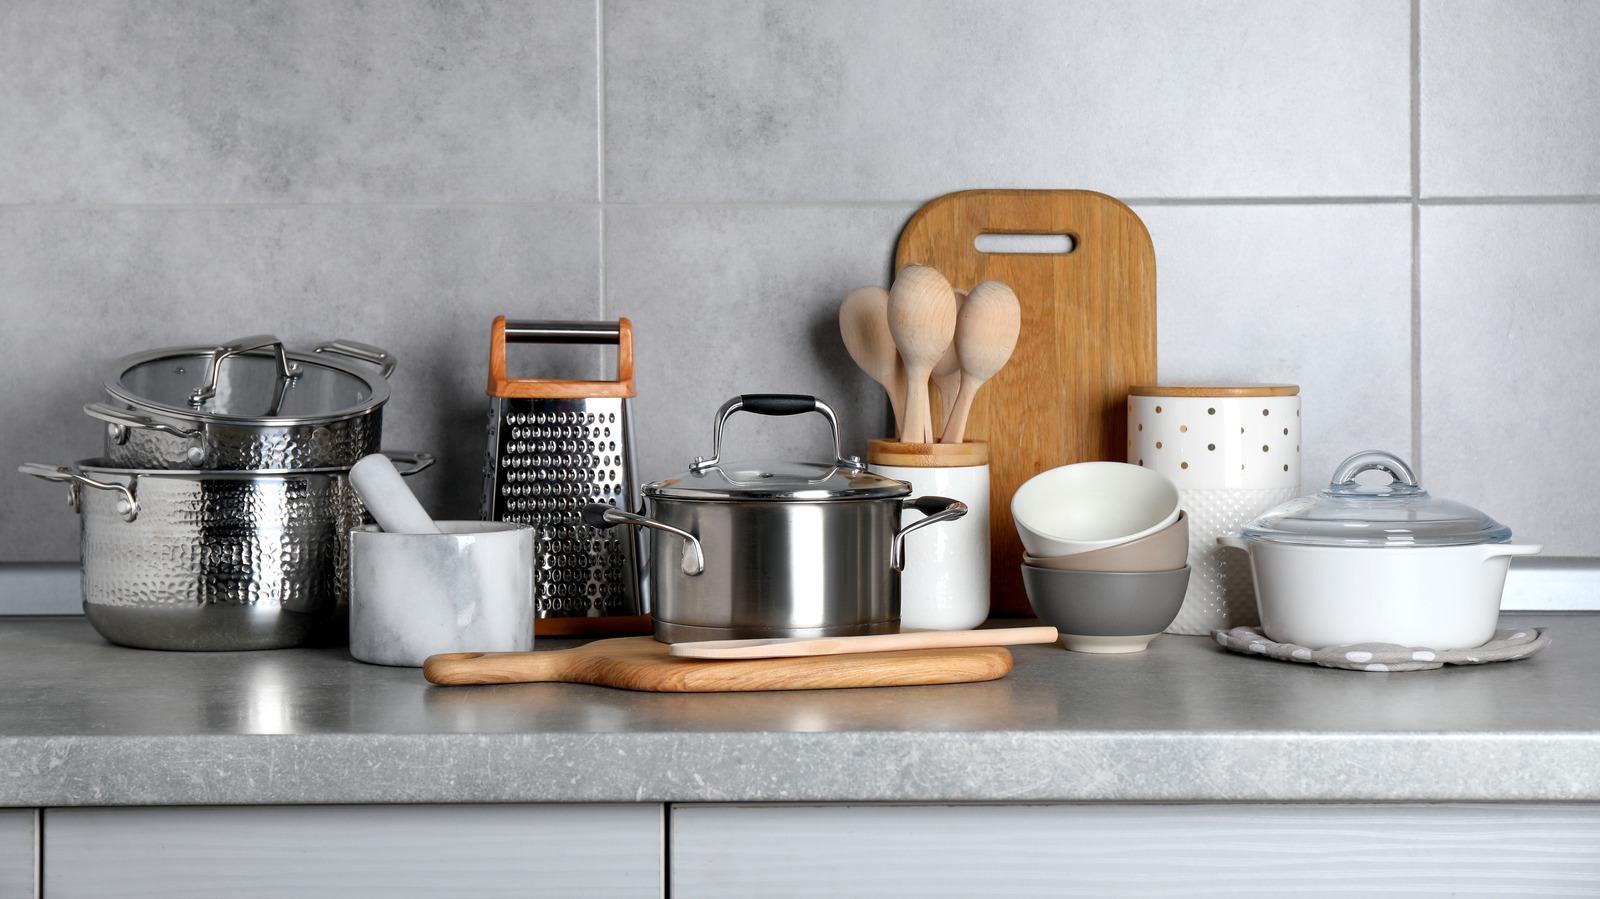 Baking tools: Essential baking tools and equipment for your kitchen